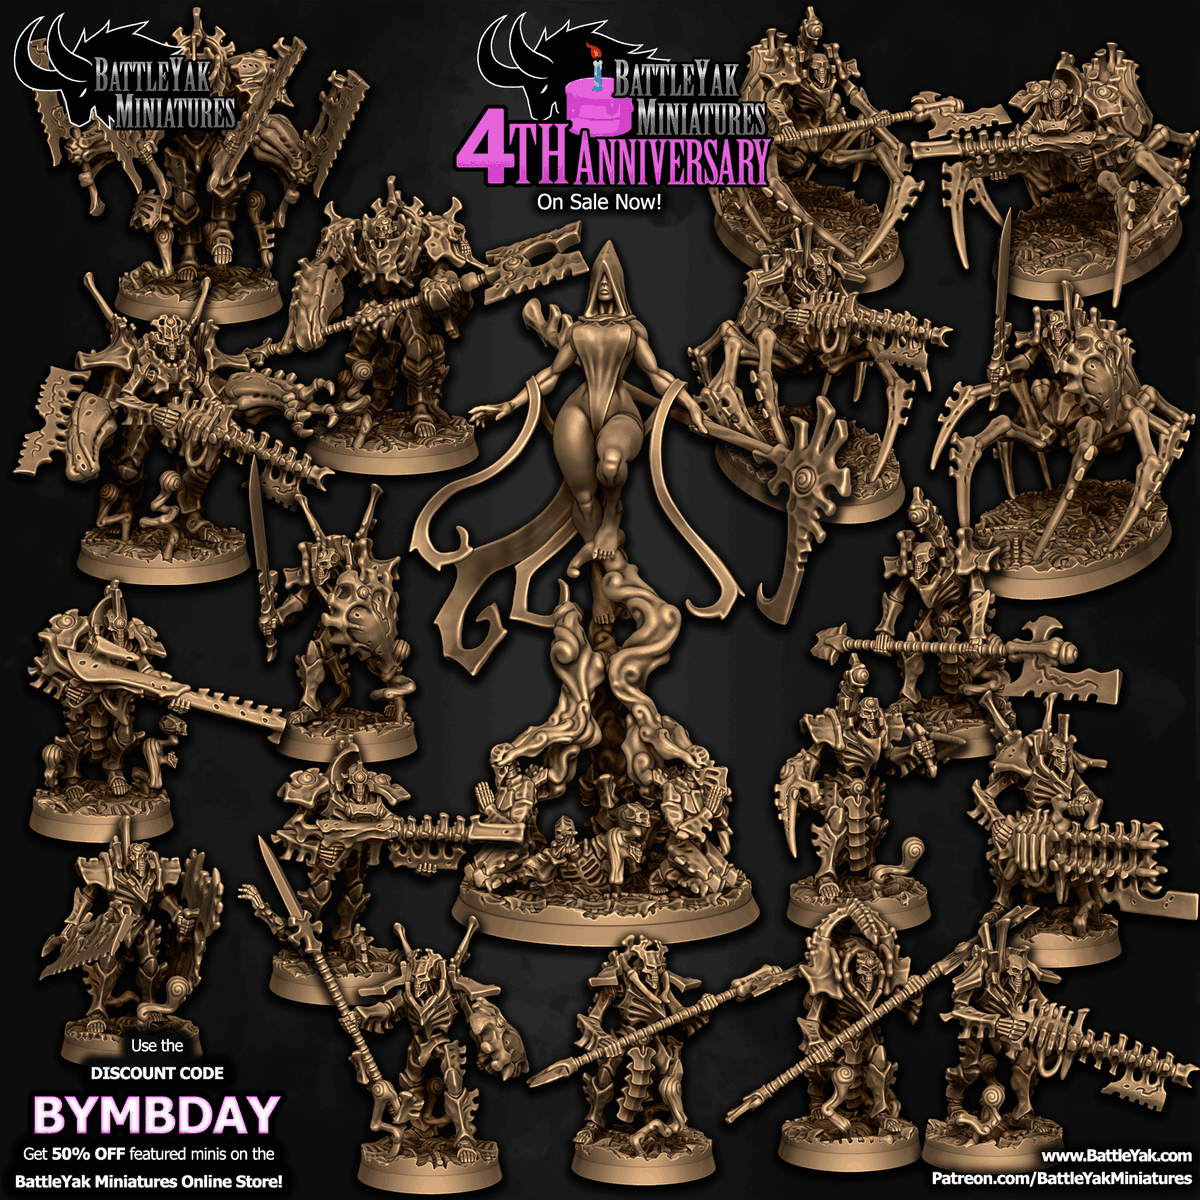 Battle Yak Miniatures turned 4 years old this March! Celebrate on the online store with the code BYMBDAY! battleyak.com #3dprinting #tabletopgaming #3Dsculpting #dnd #pathfinder #wargaming #ttrpg #eldritch #undead #miniatures